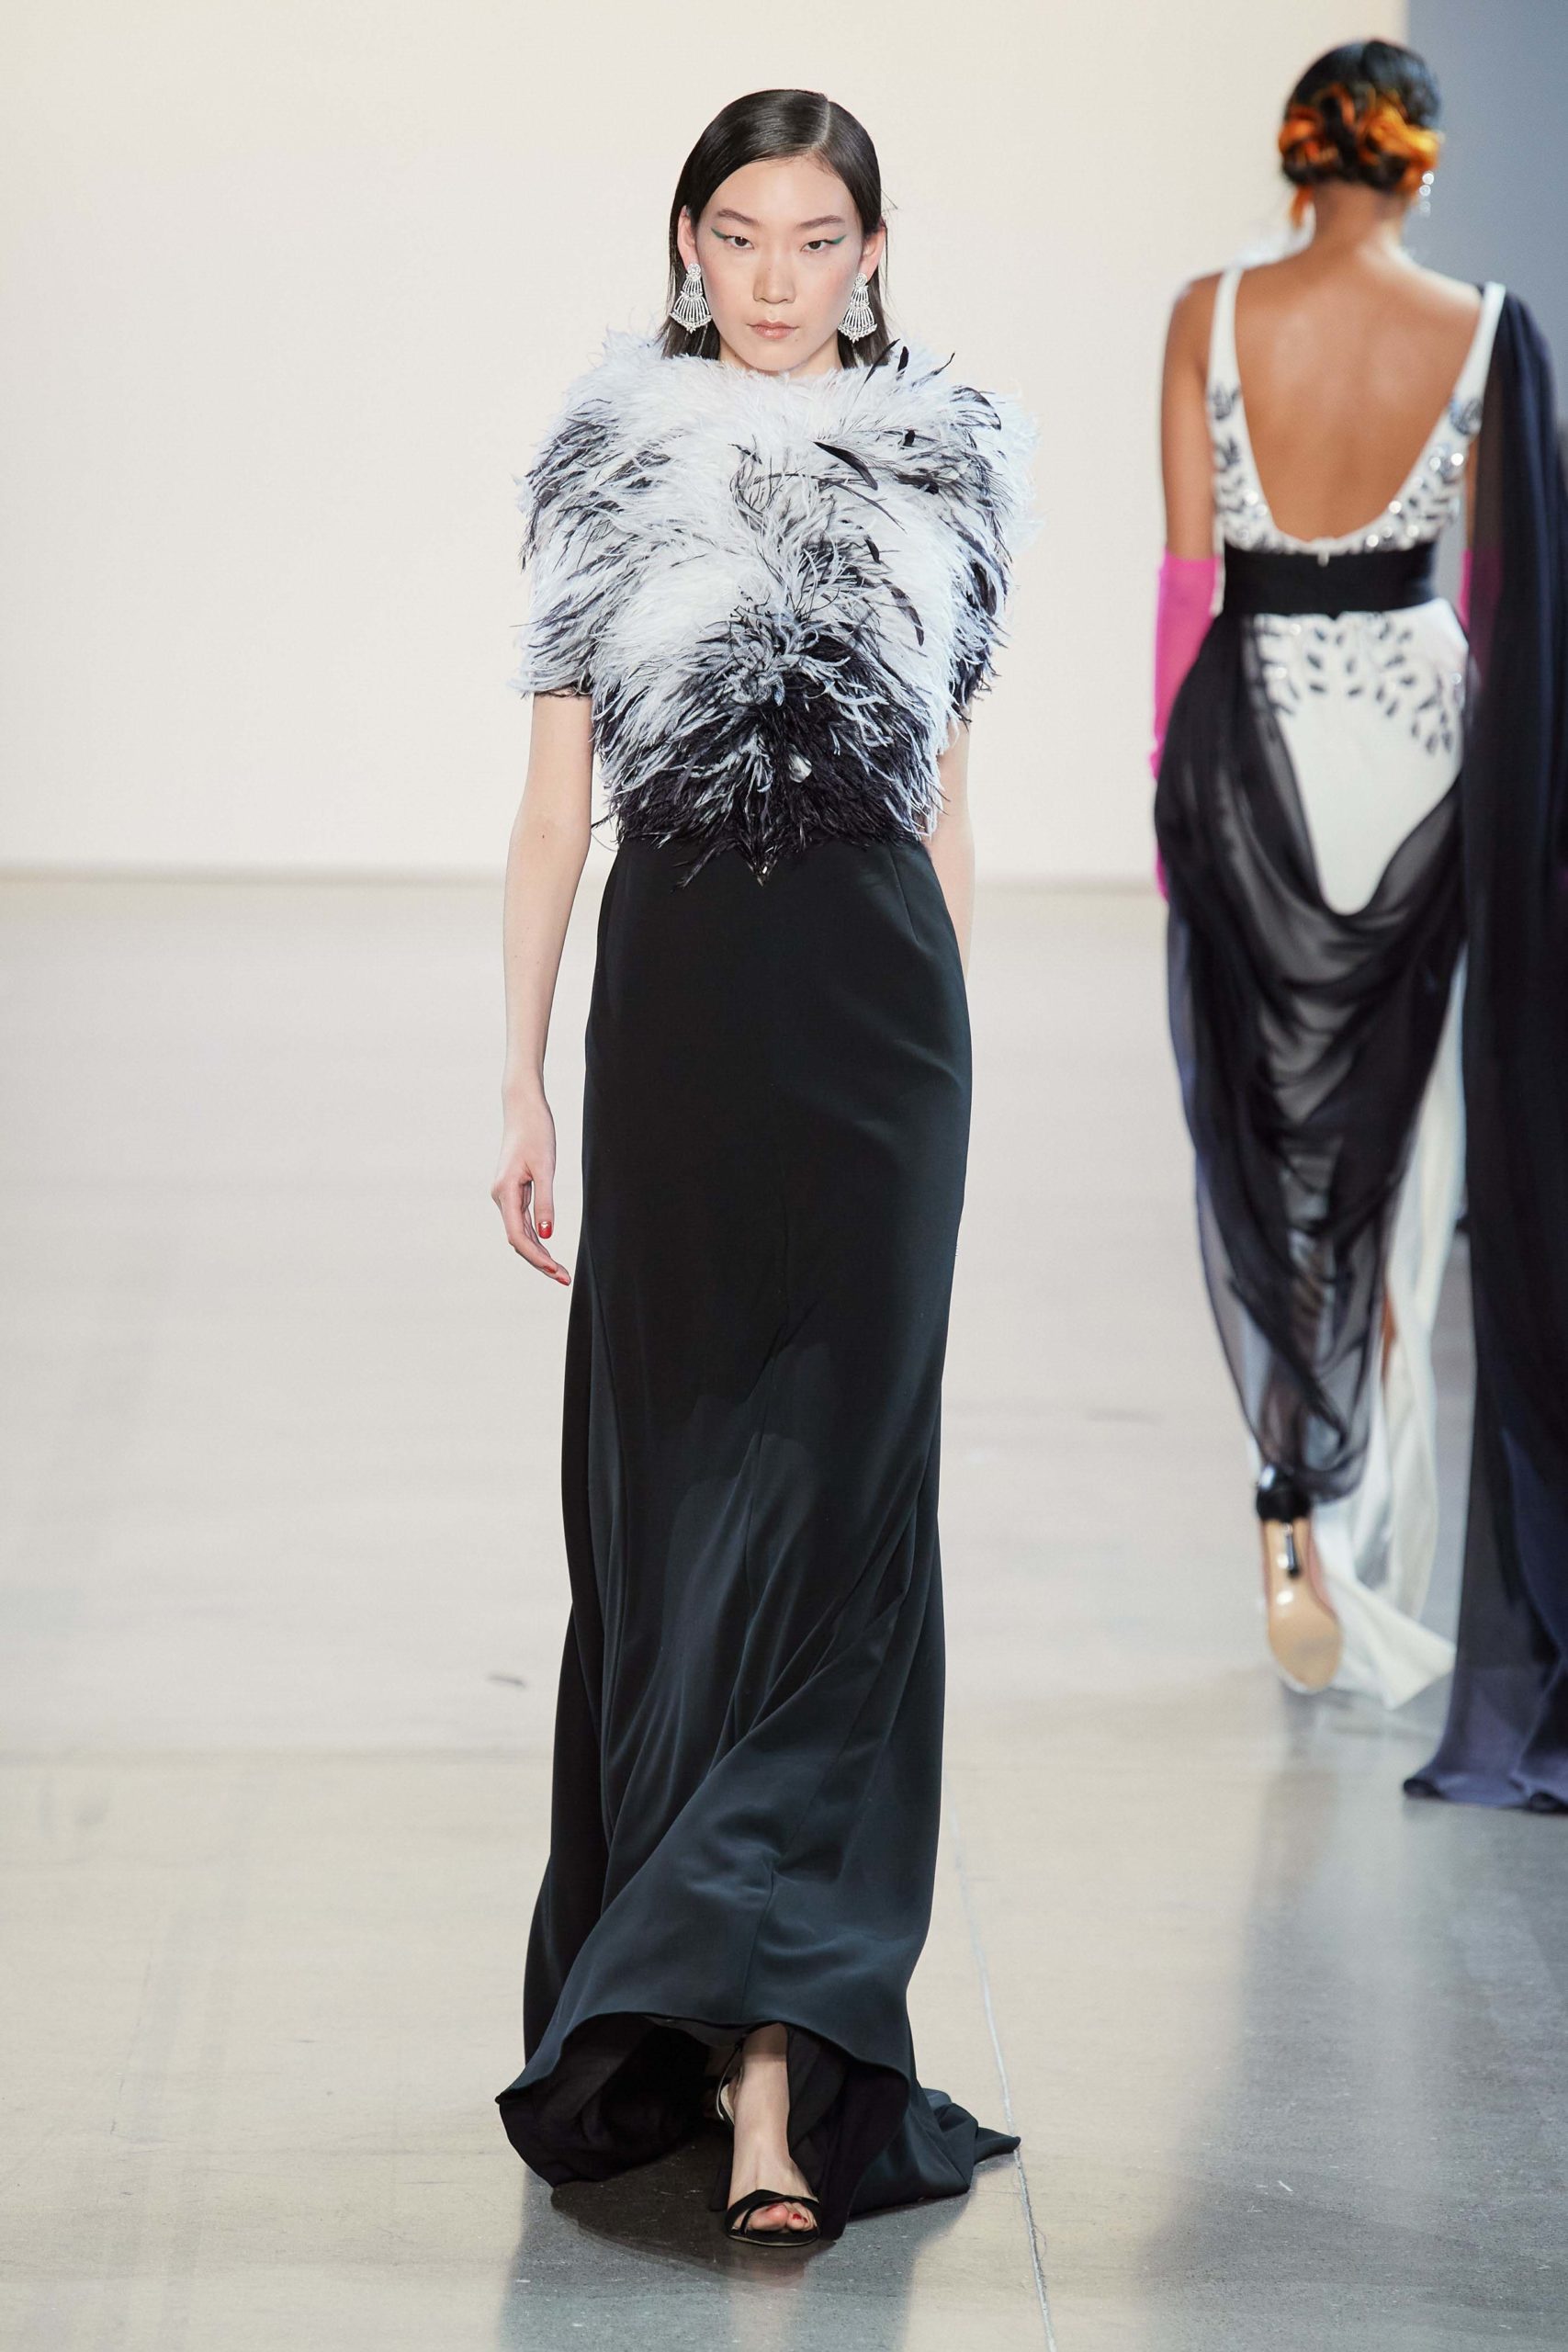 Bibhu Mohapatra Fall Winter 2020 trends runway coverage Ready To Wear Vogue dress feather